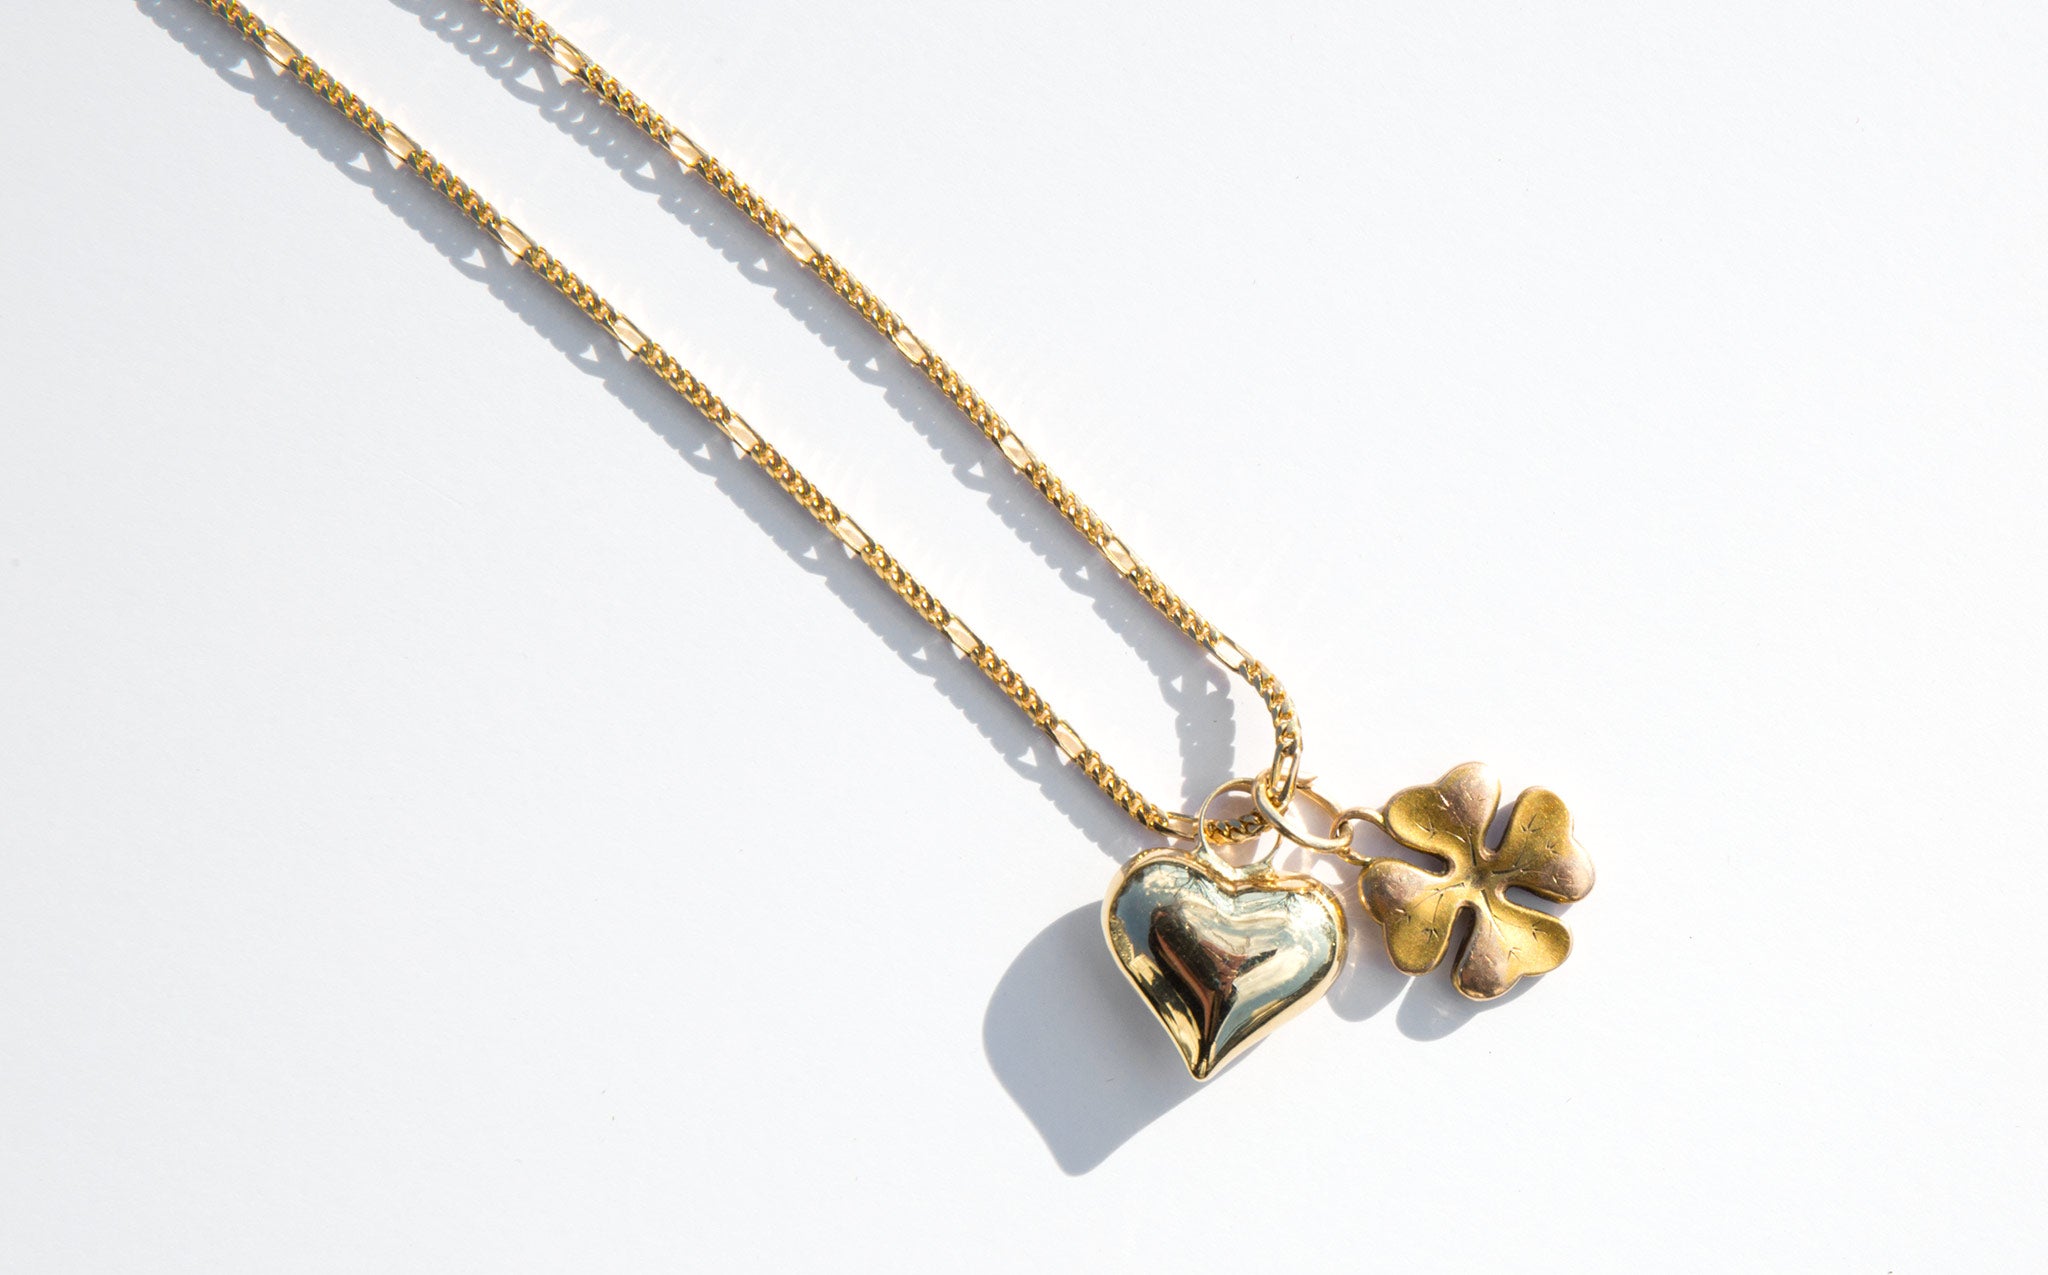 The Lucky Lover Charm Necklace